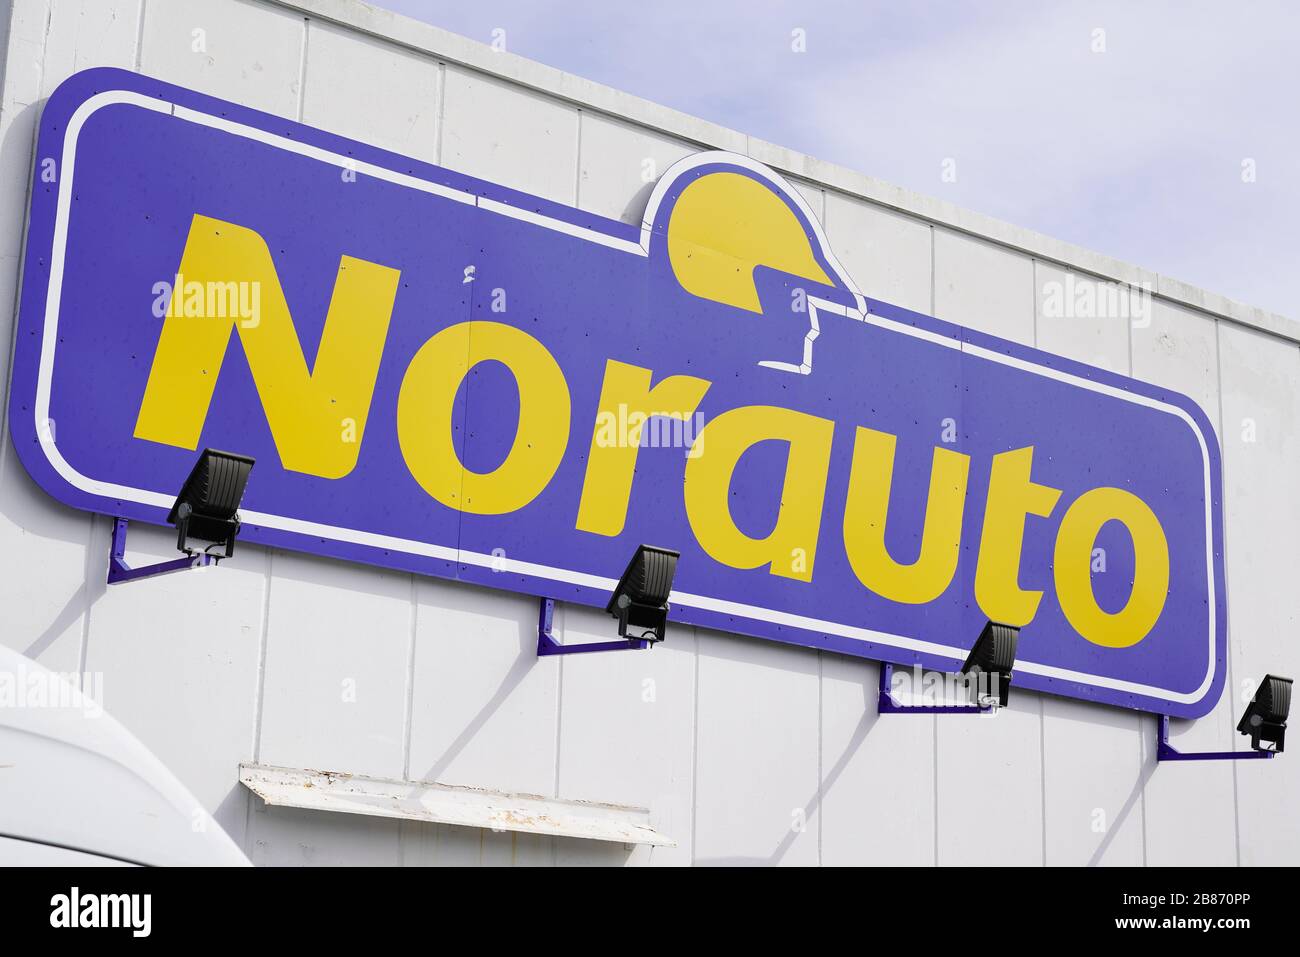 Bordeaux , Aquitaine / France - 09 23 2019 : Norauto logo French company car repairs accessories and parts Stock Photo